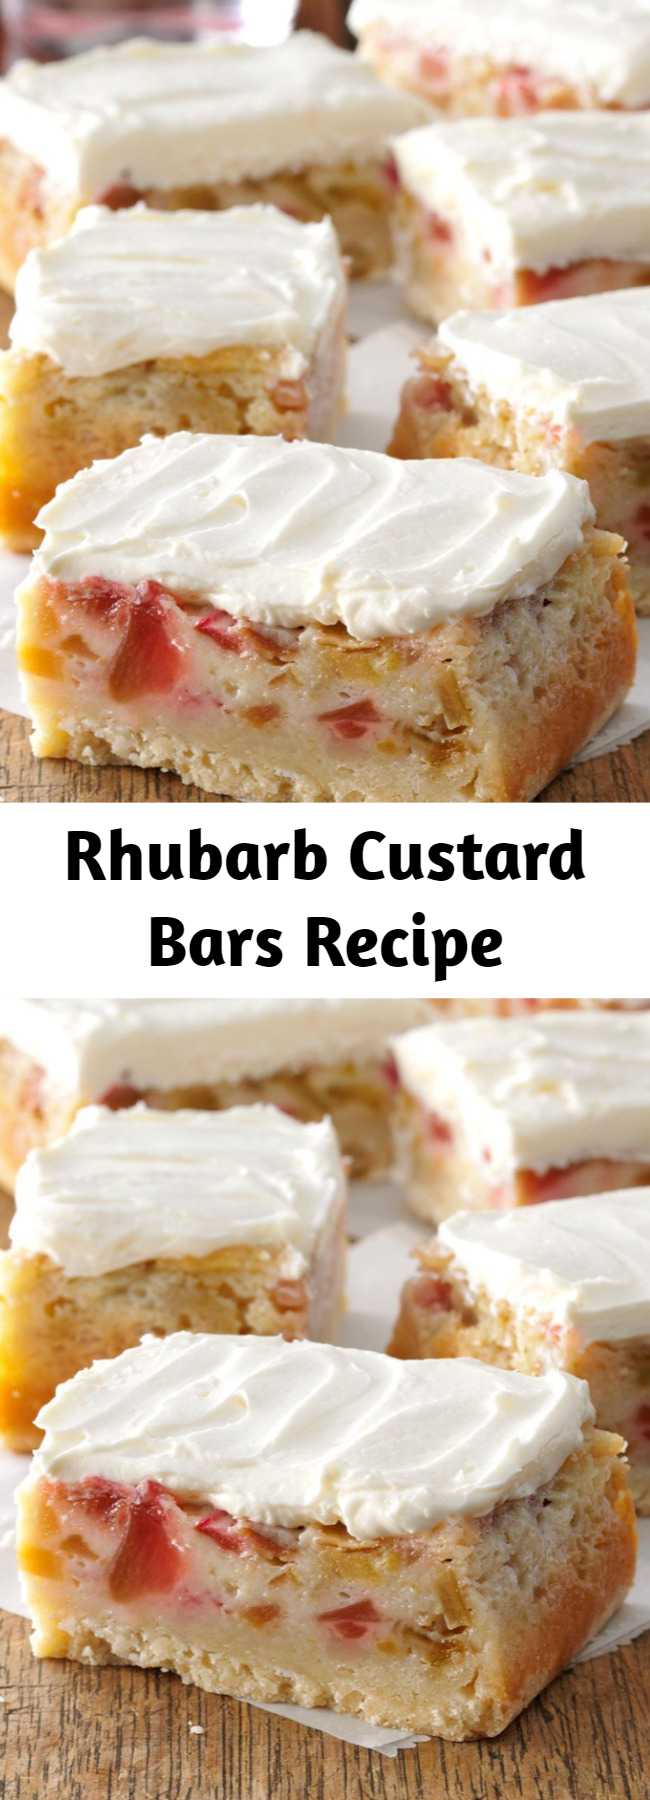 Rhubarb Custard Bars Recipe - Once I tried these rich, gooey bars, I just had to have the recipe so I could make them for my family and friends. The shortbreadlike crust and the rhubarb and custard layers inspire people to find rhubarb that they can use to fix a batch for themselves.